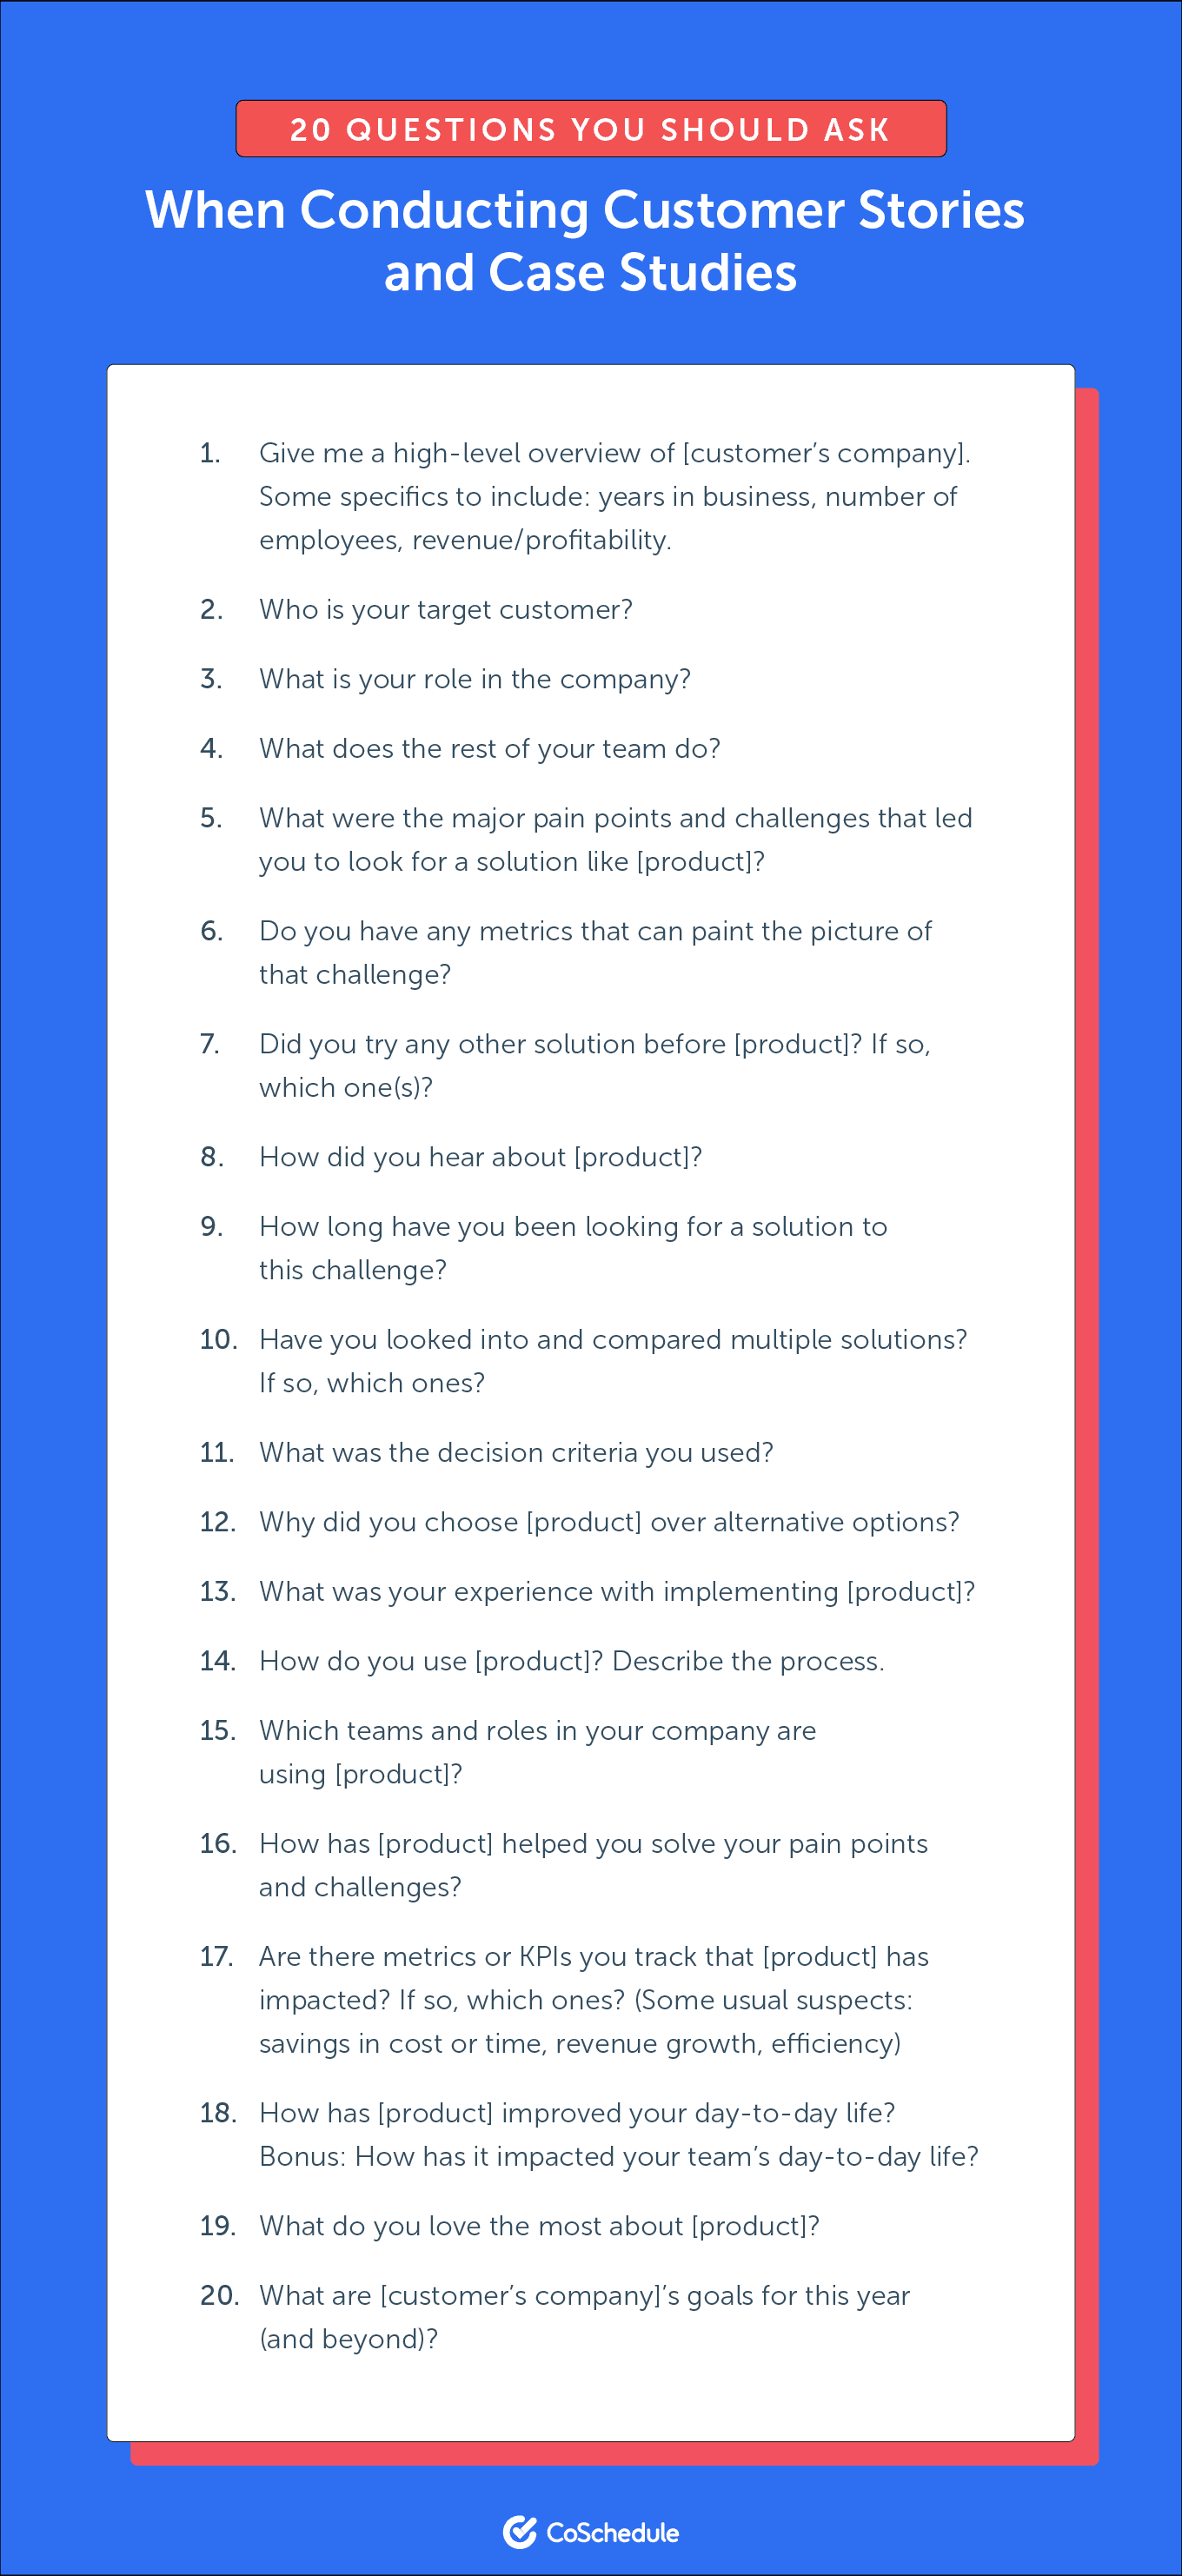 Questions to ask when you are conducting customer stories and case studies